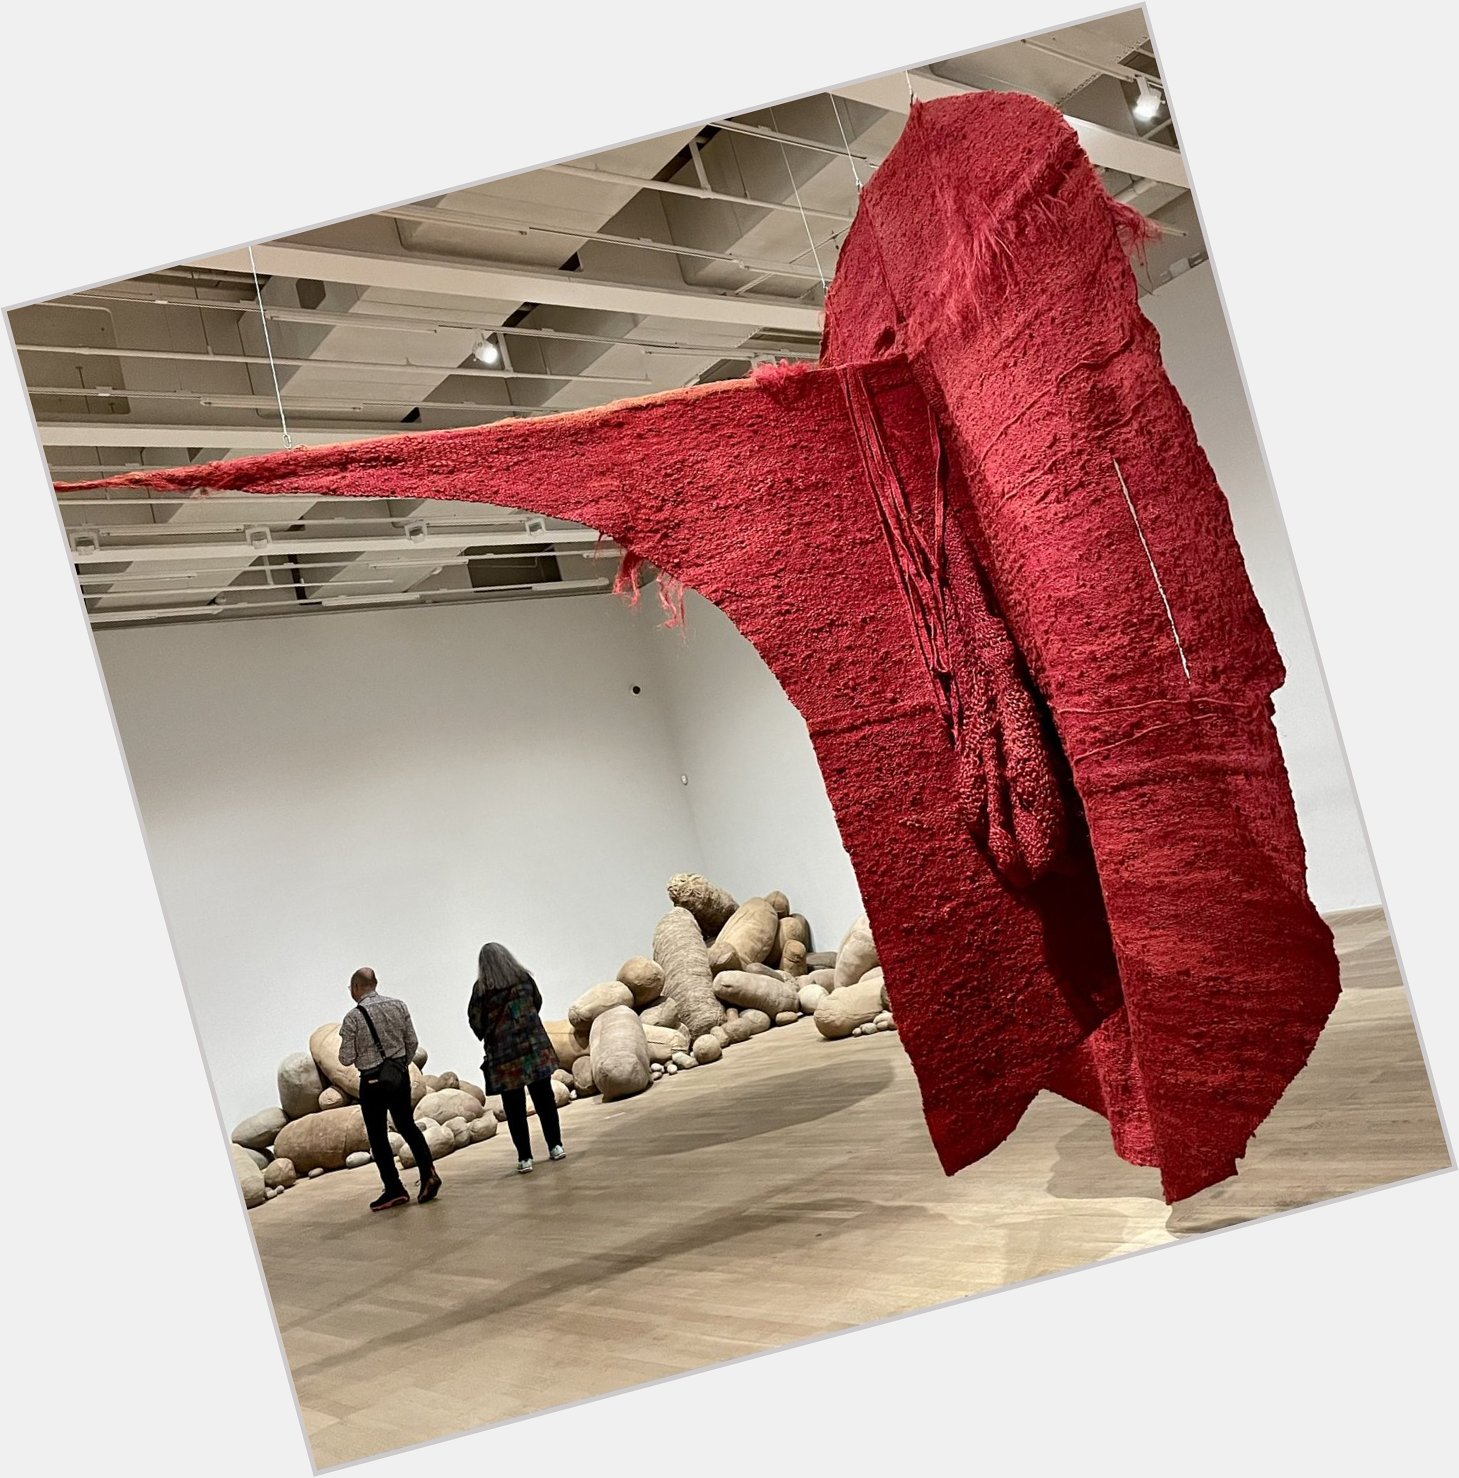 Happy 93rd birthday Magdalena Abakanowicz, while you rest in peace 